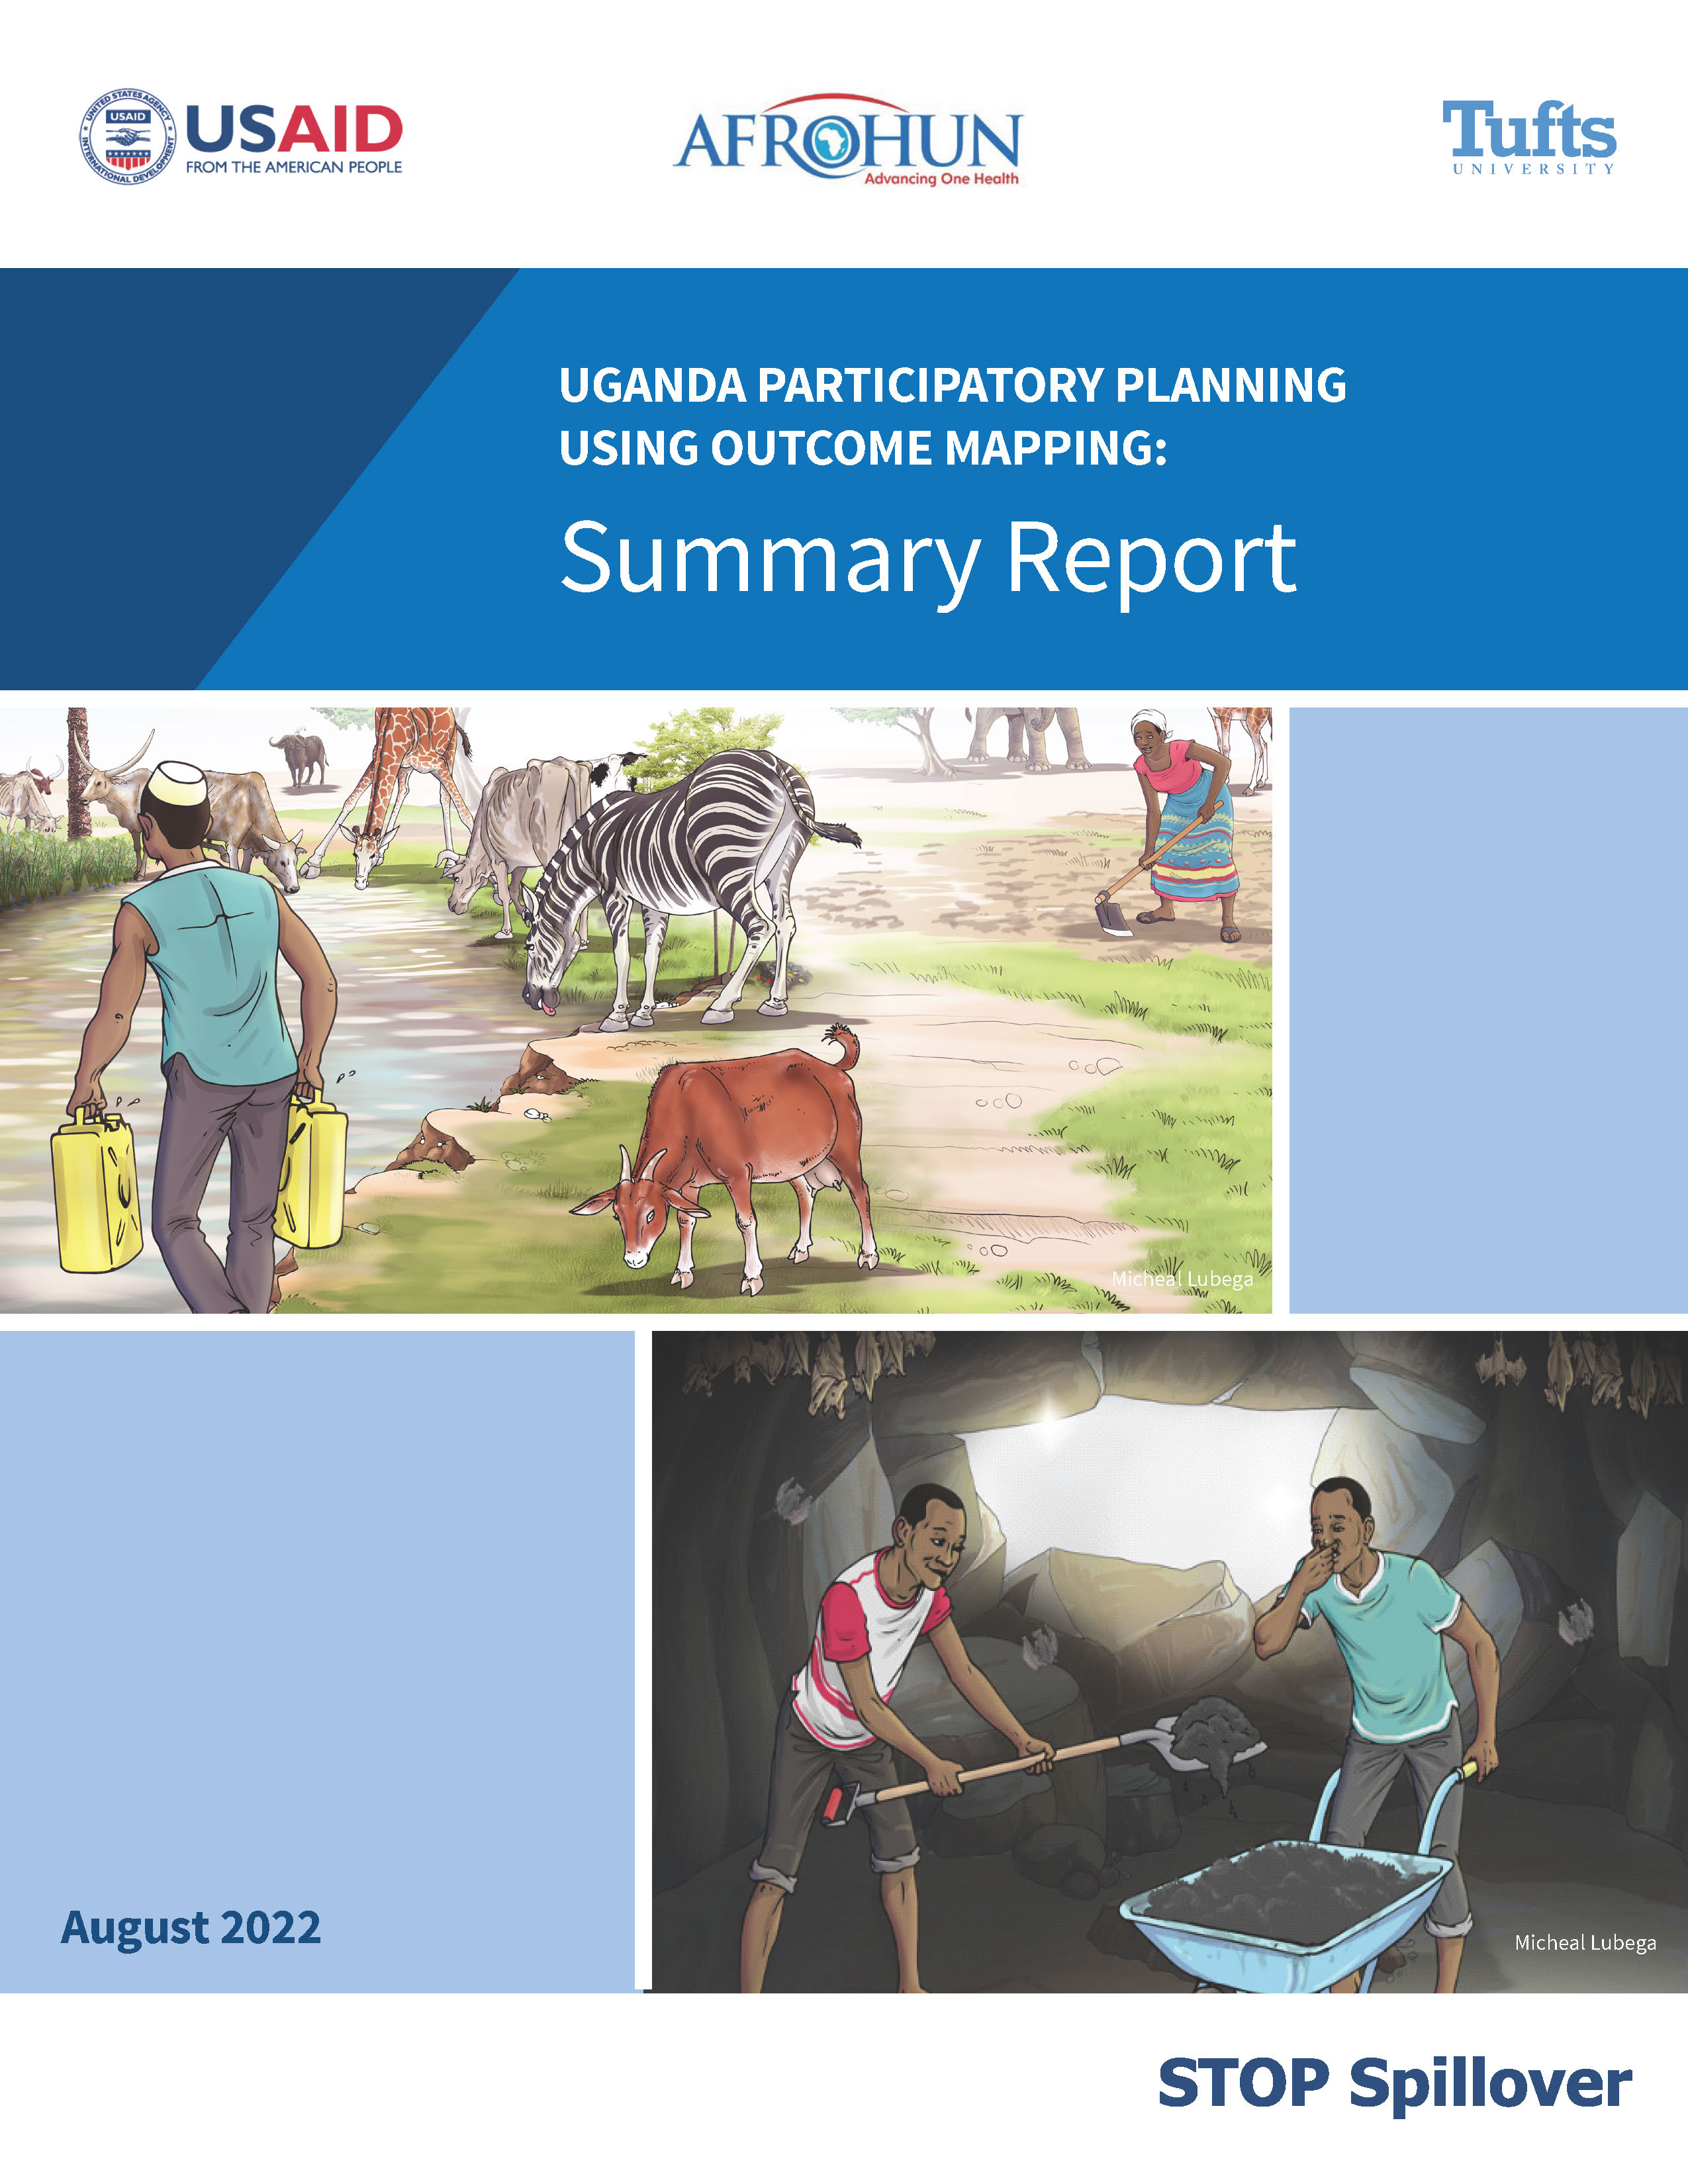 Thumbnail of summary report cover